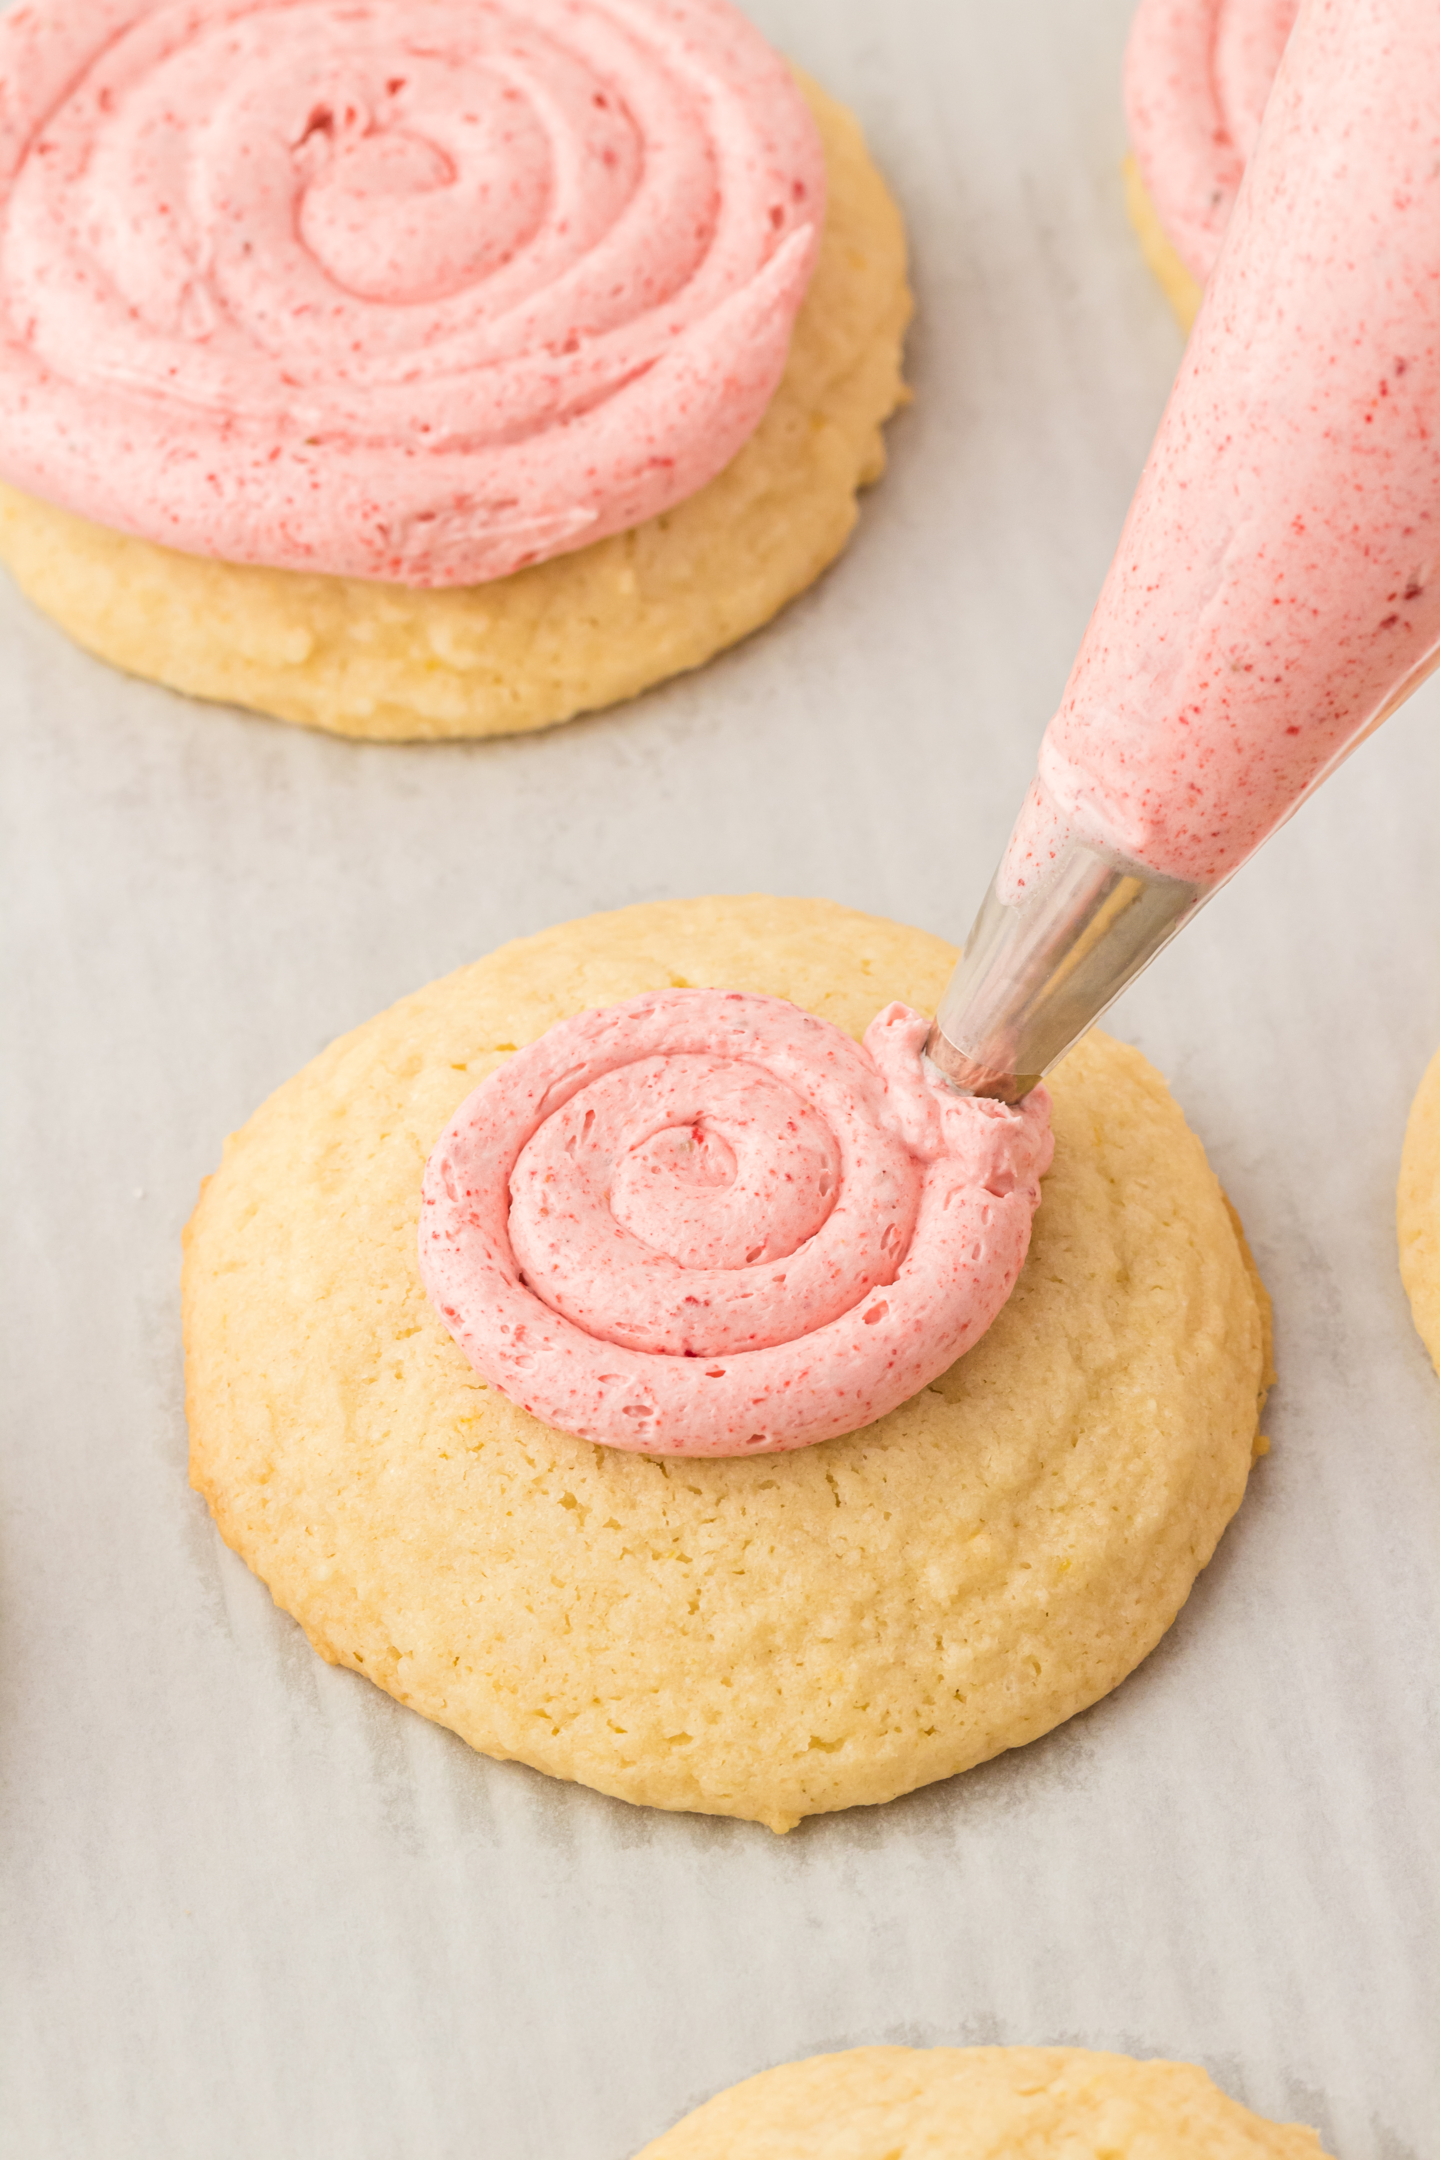 piping bag piping strawberry frosting in a circle pattern onto a lemon cookie